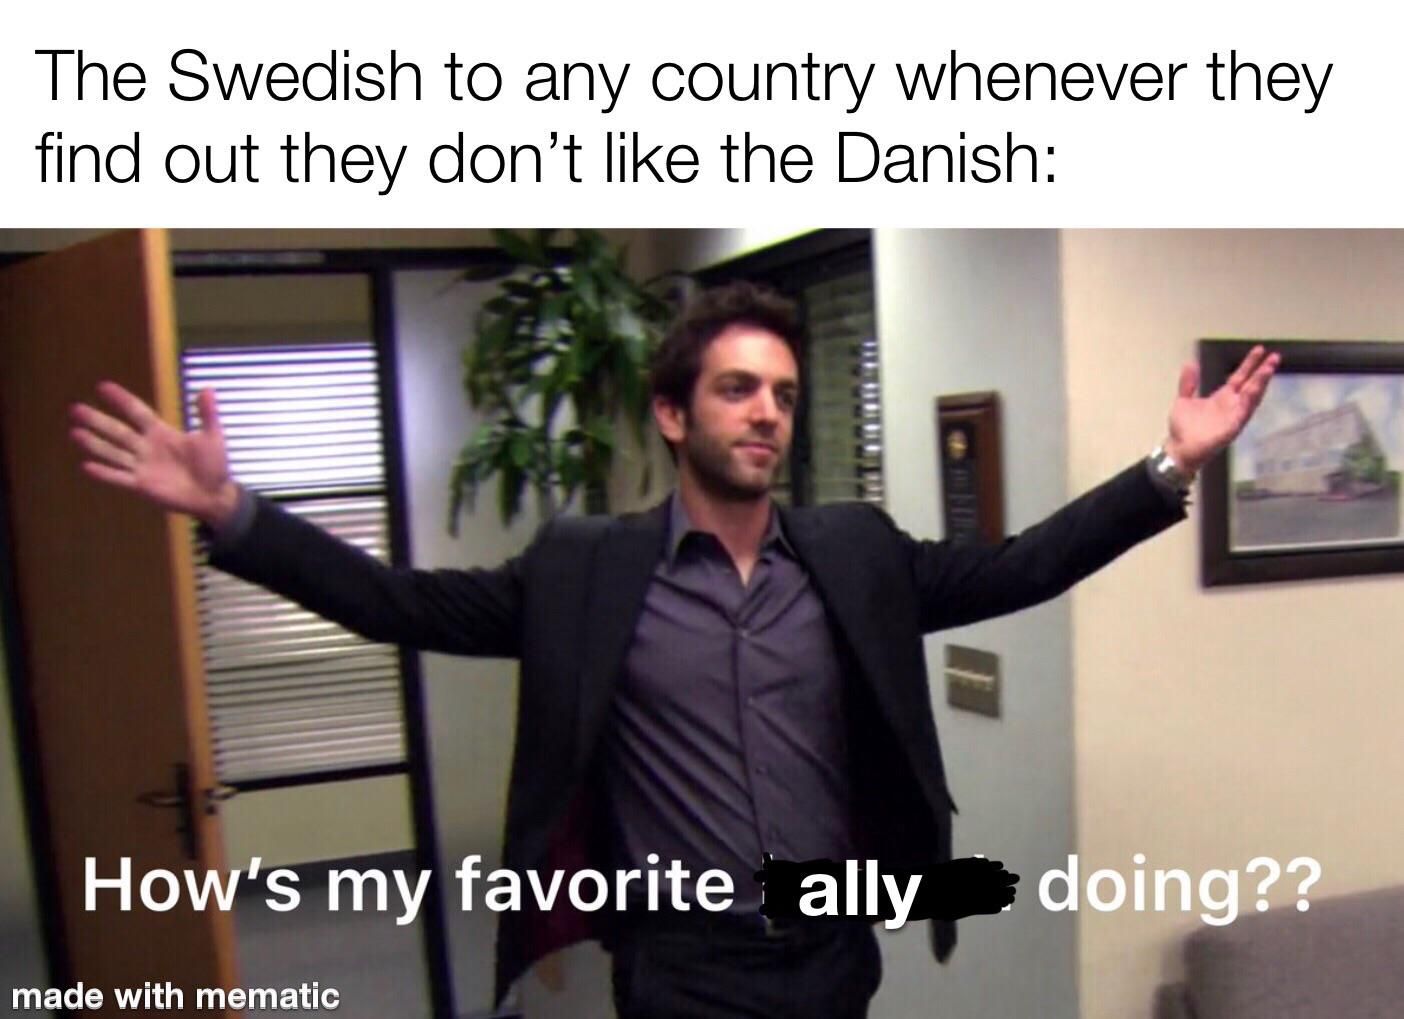 Sweden would make an alliance with anyone if it meant they could *** over the Danish